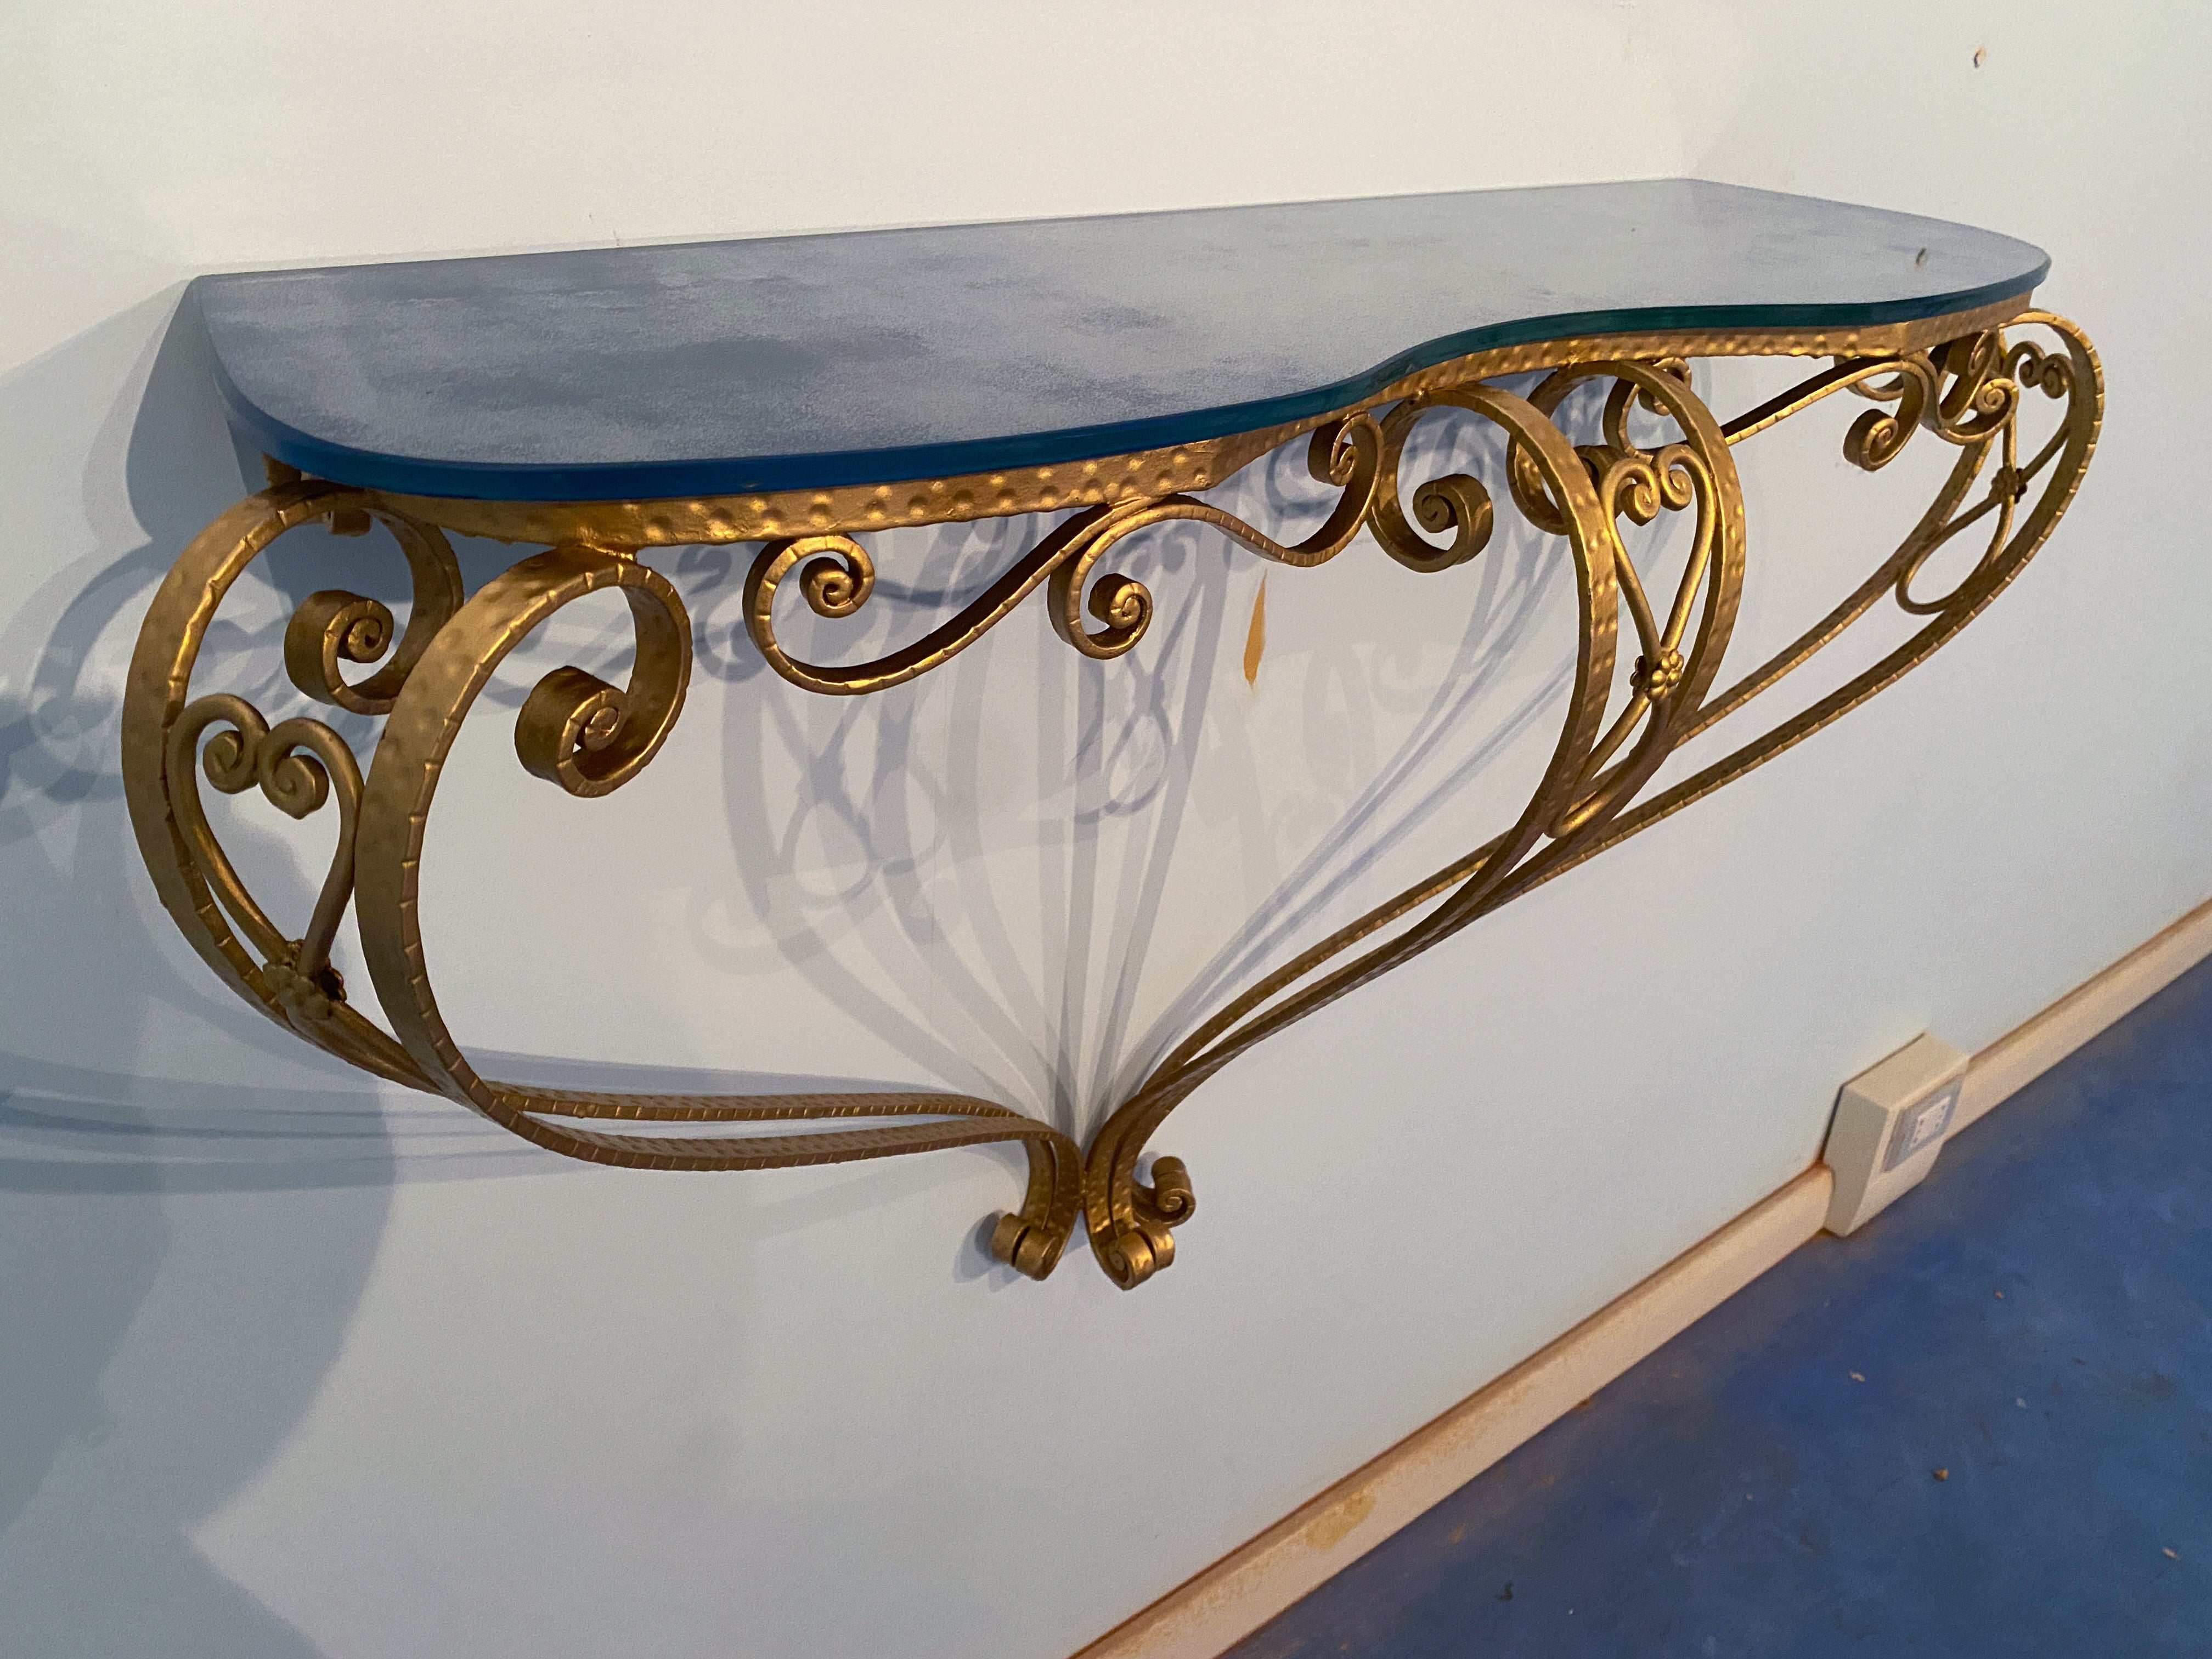 This elegant console, designed in the 1950s by Pierluigi Colli, is a true work of art that stands out for its expert handcrafted metalwork, meticulously crafted down to the smallest detail. Its sculpted blue glass top, further enriched by delicate